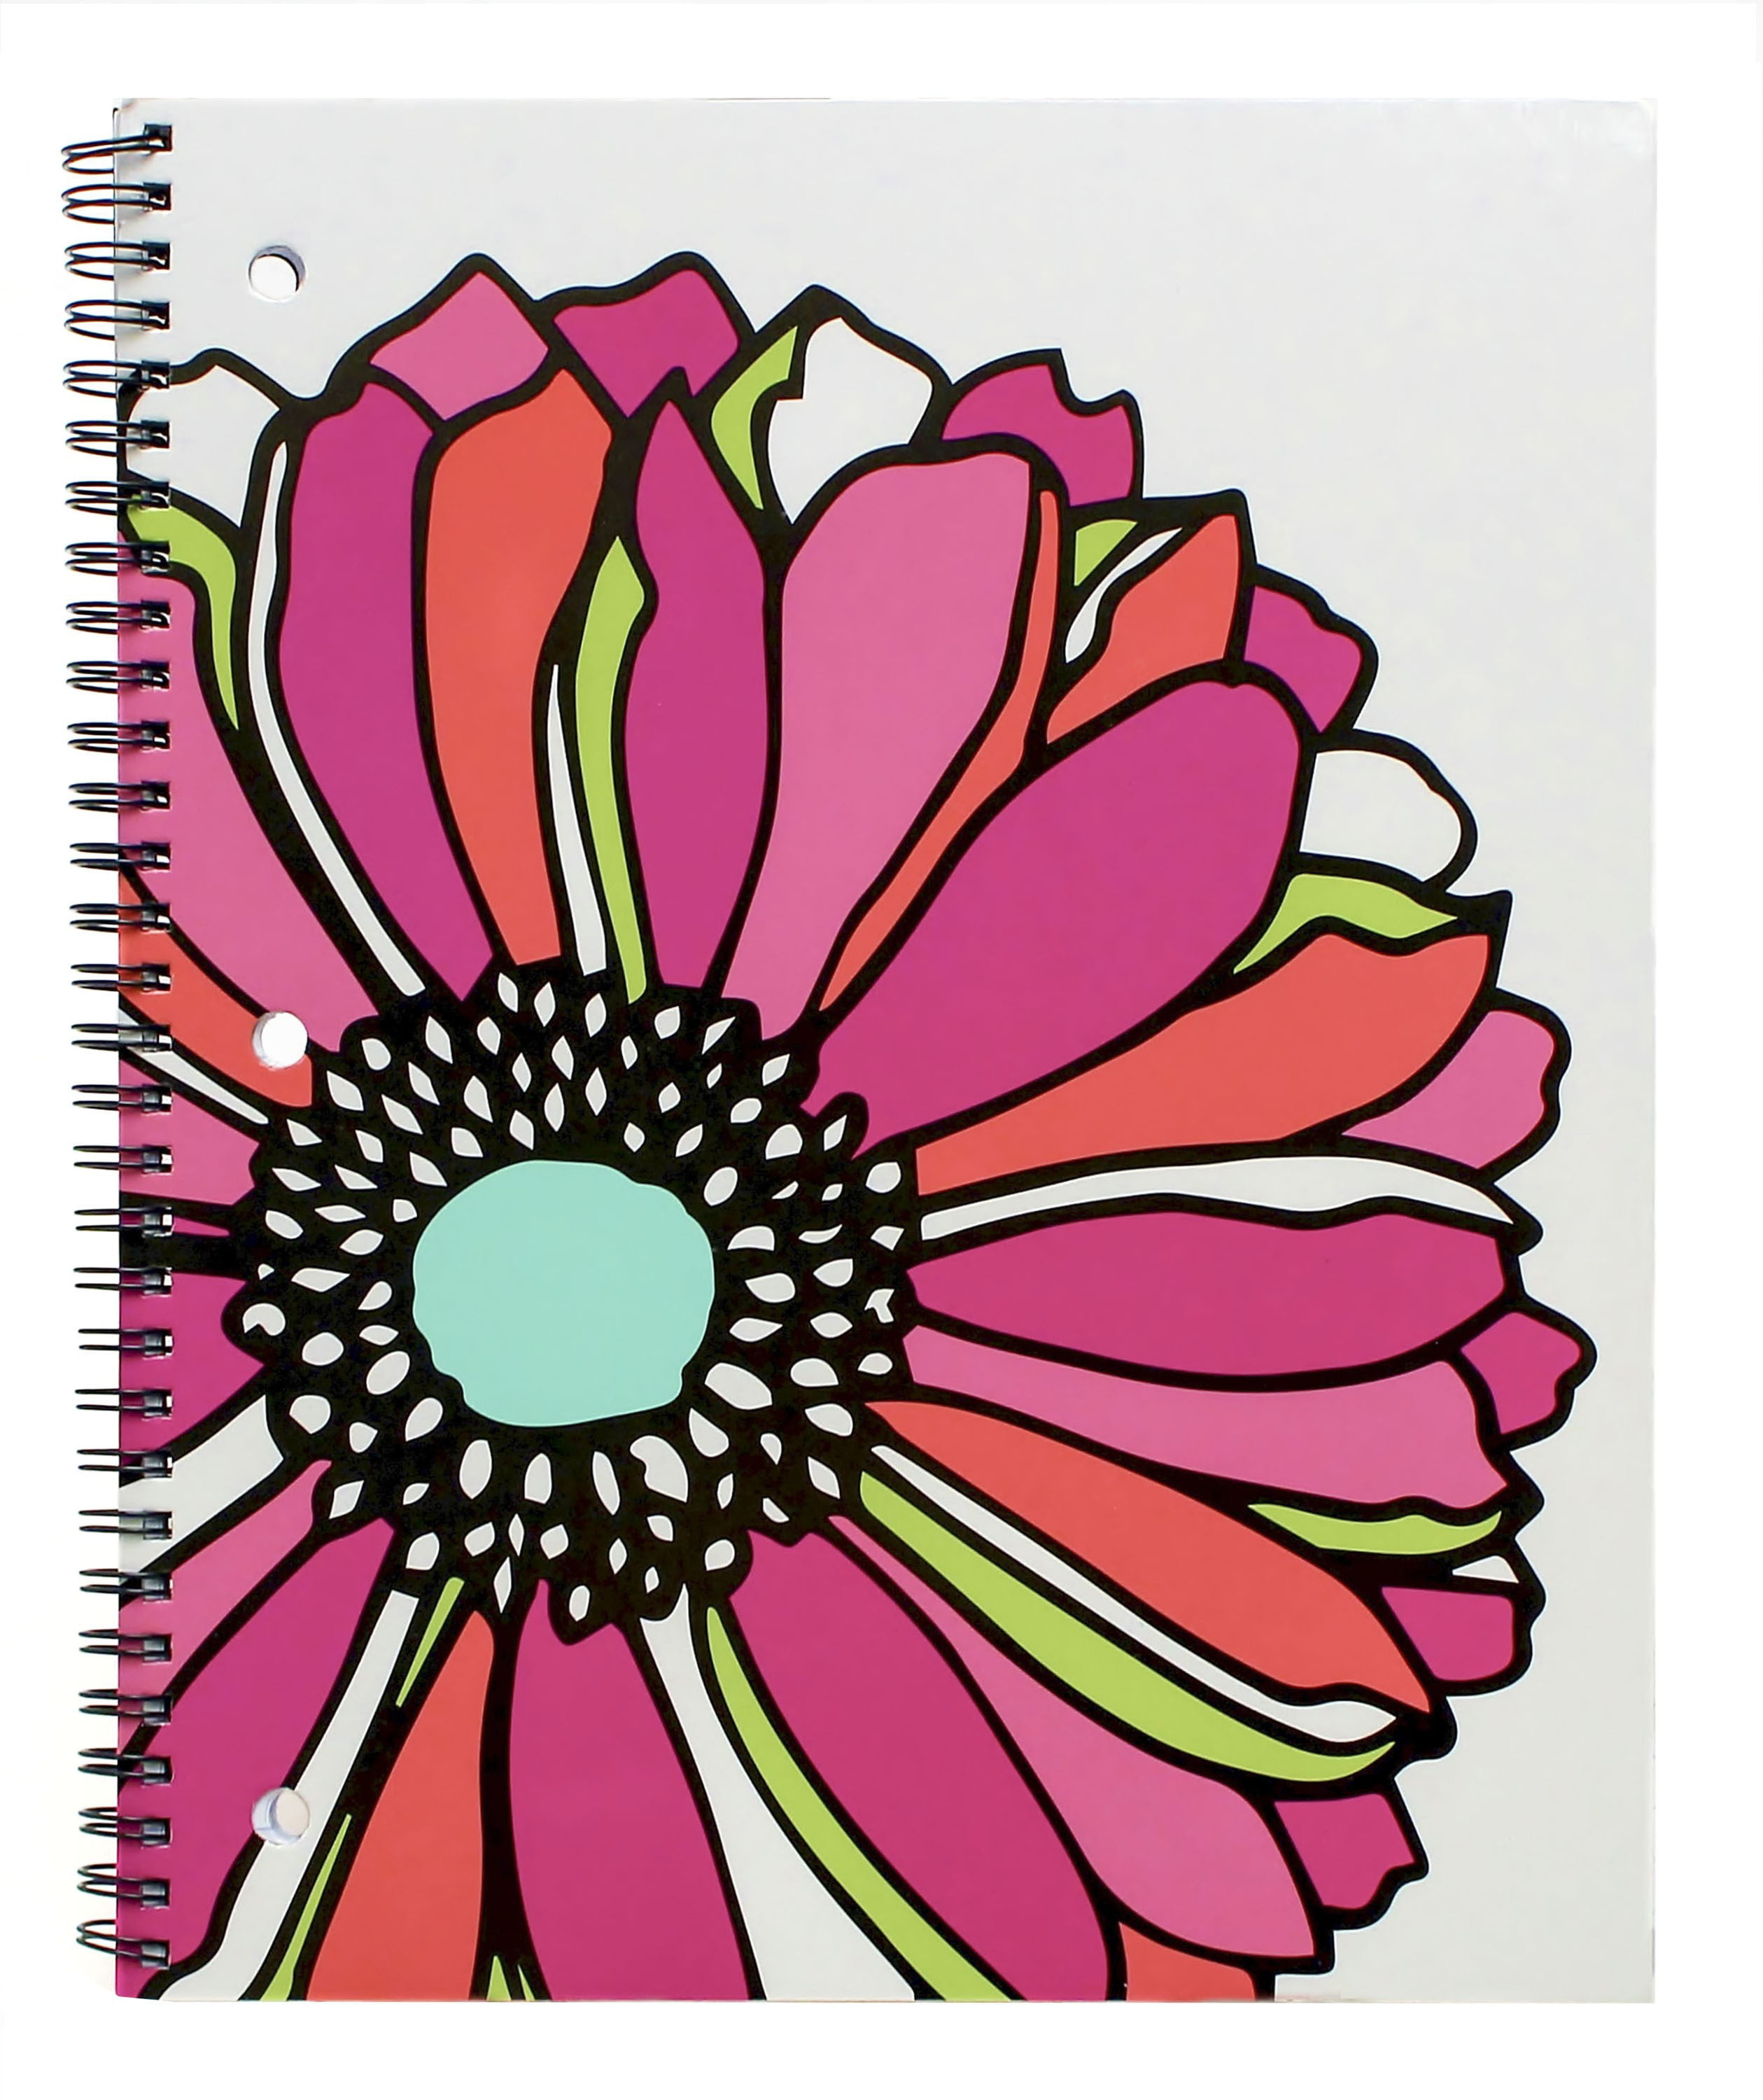 Notebook For Kids: With Colorful Cover: Blessed, Happy and: 9798731572330:  : Books